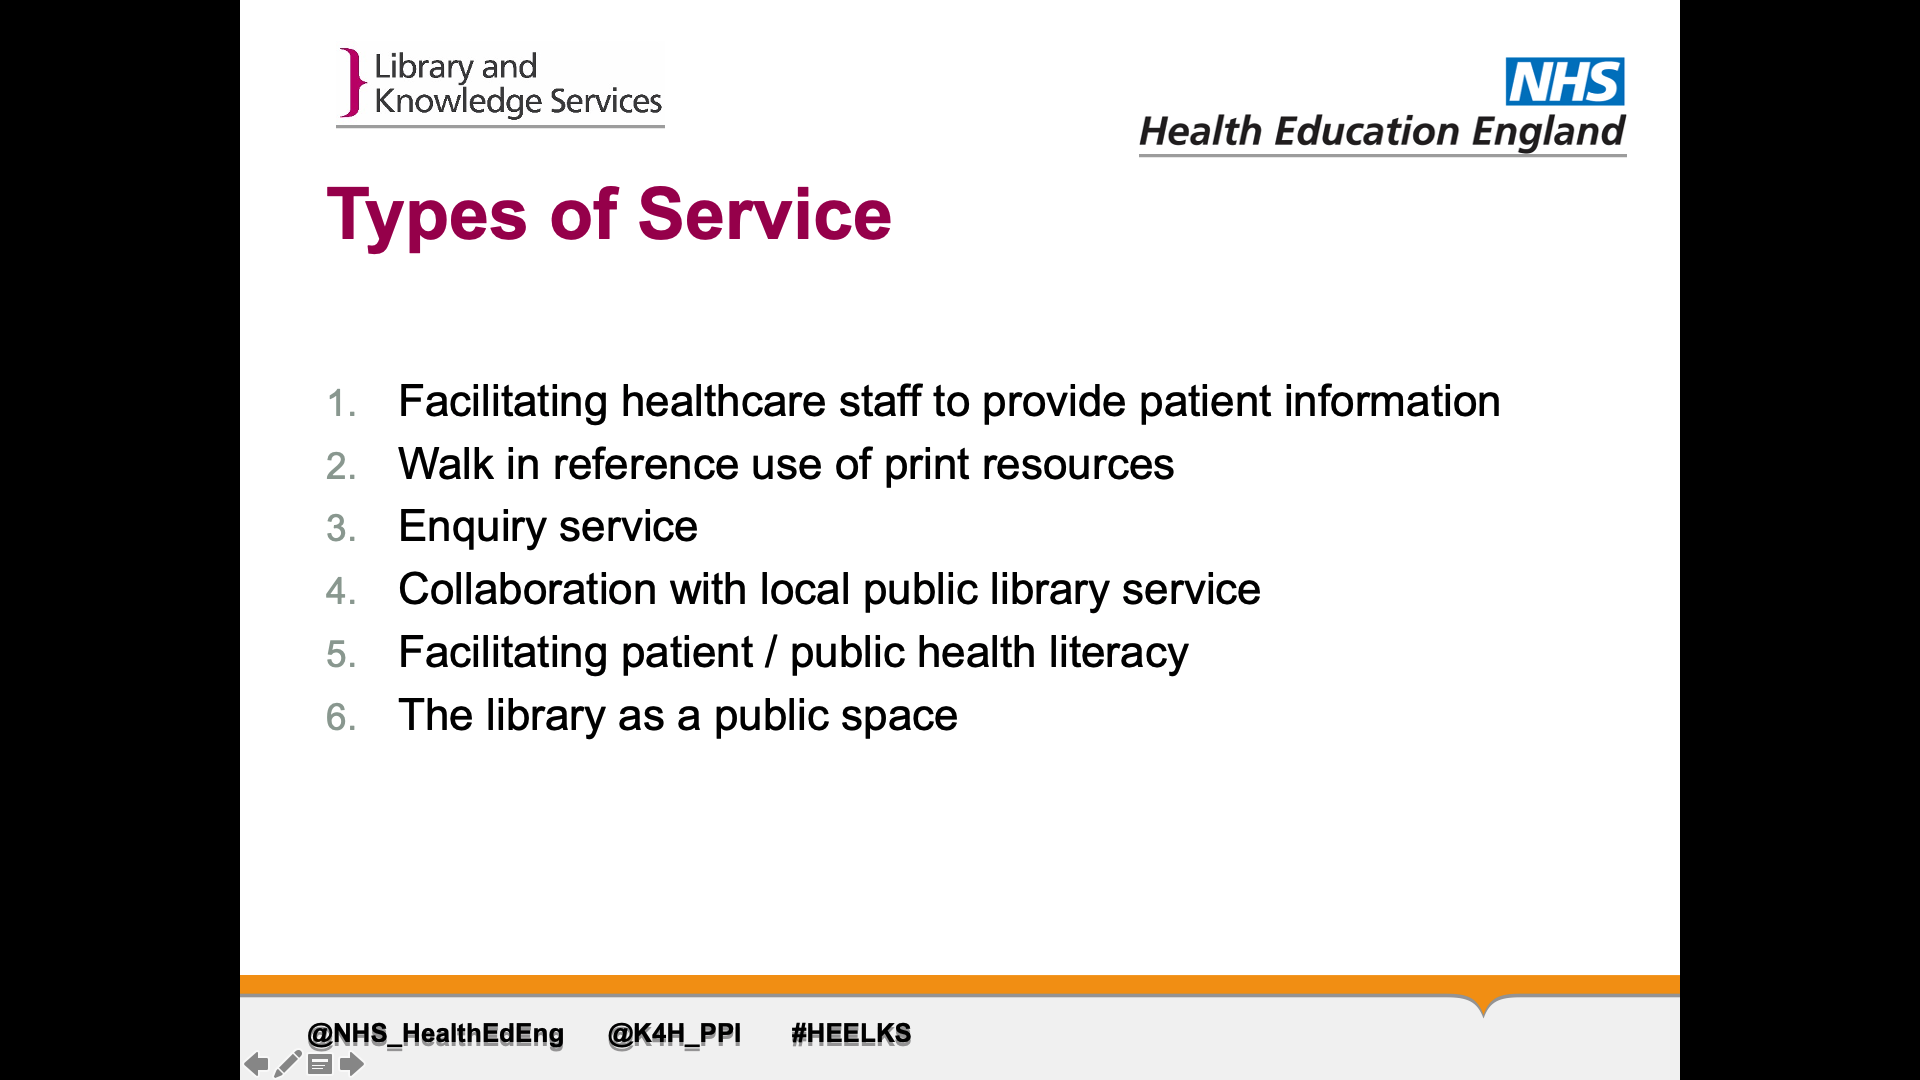 Title: Types of Service. Text on page: 1. Facilitating healthcare staff to provide patient information 2. Walk in reference use of print resources 3. Enquiry service 4. Collaboration with local public library service 5. Facilitating patient / public health literacy 6. The library as a public space